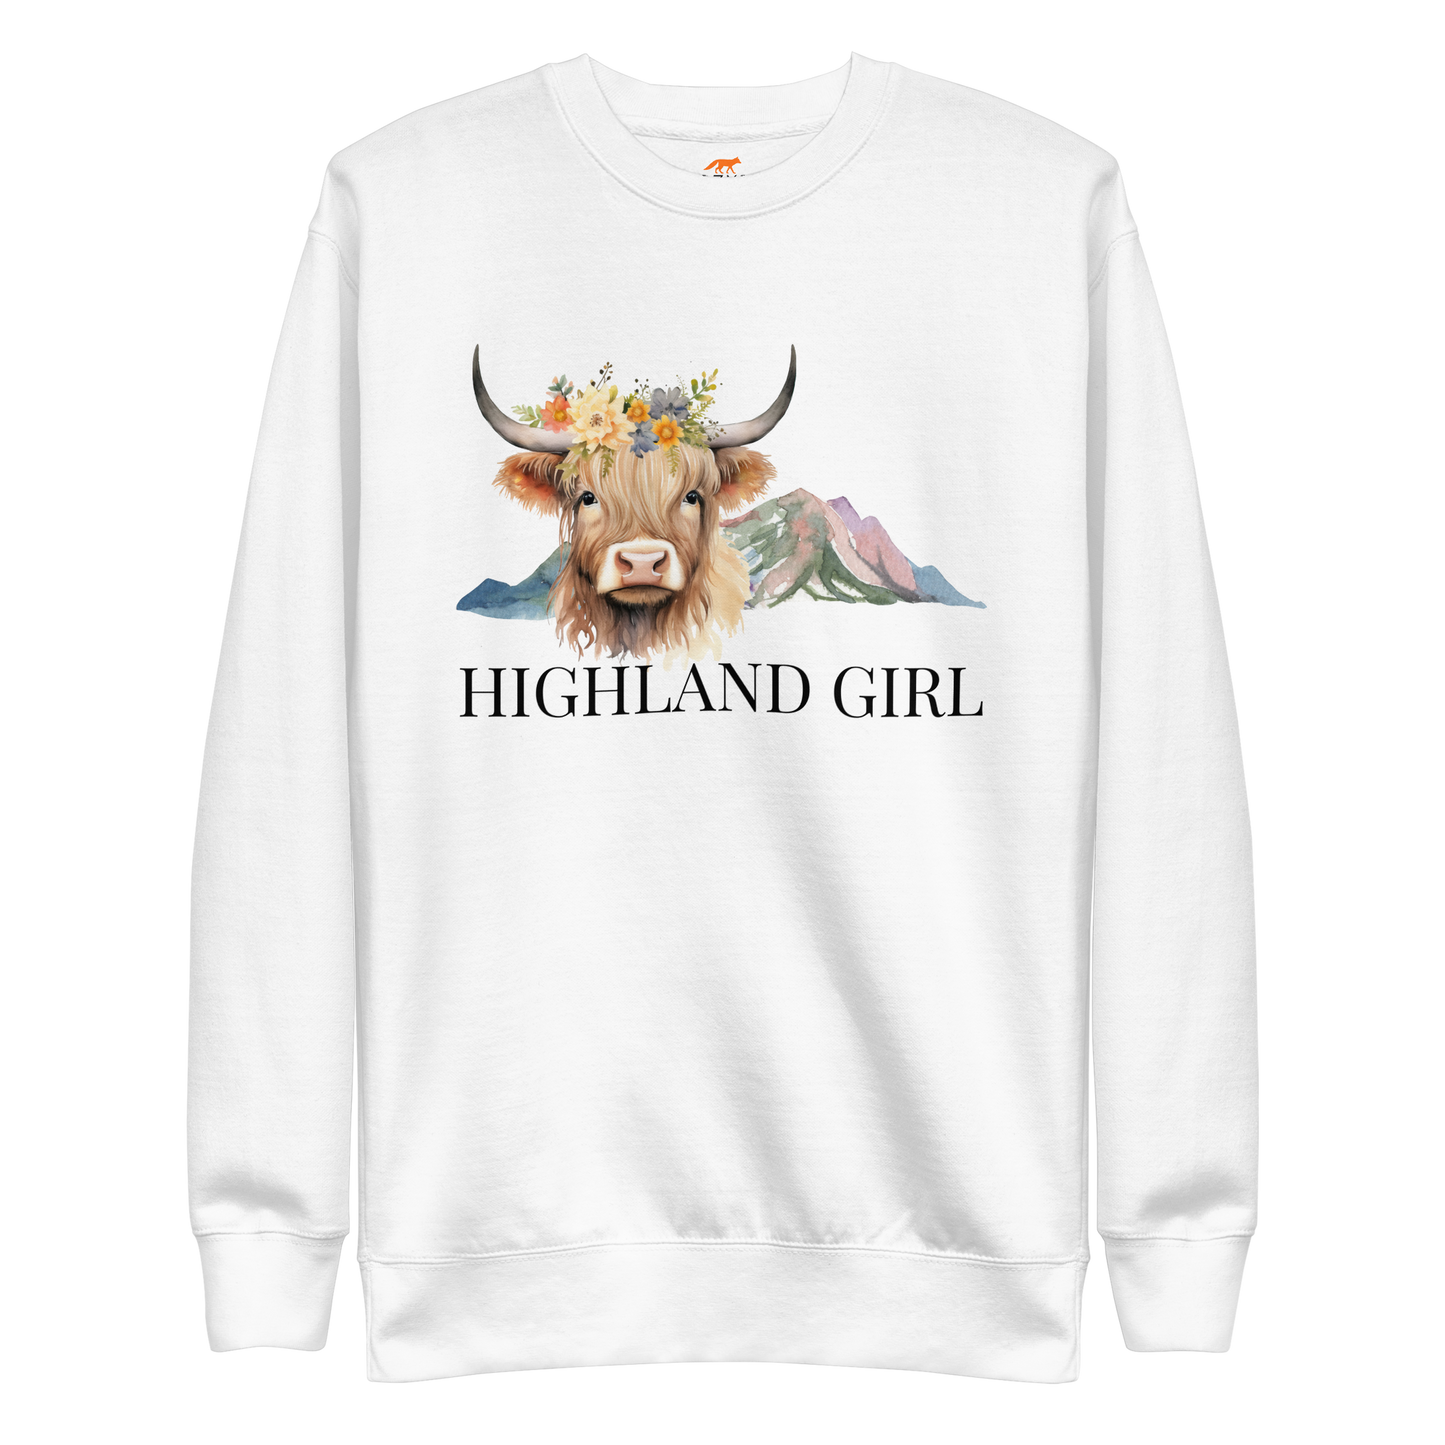 White Premium Highland Cow Sweatshirt featuring an adorable Highland Girl graphic on the chest - Cute Graphic Highland Cow Sweatshirts - Boozy Fox